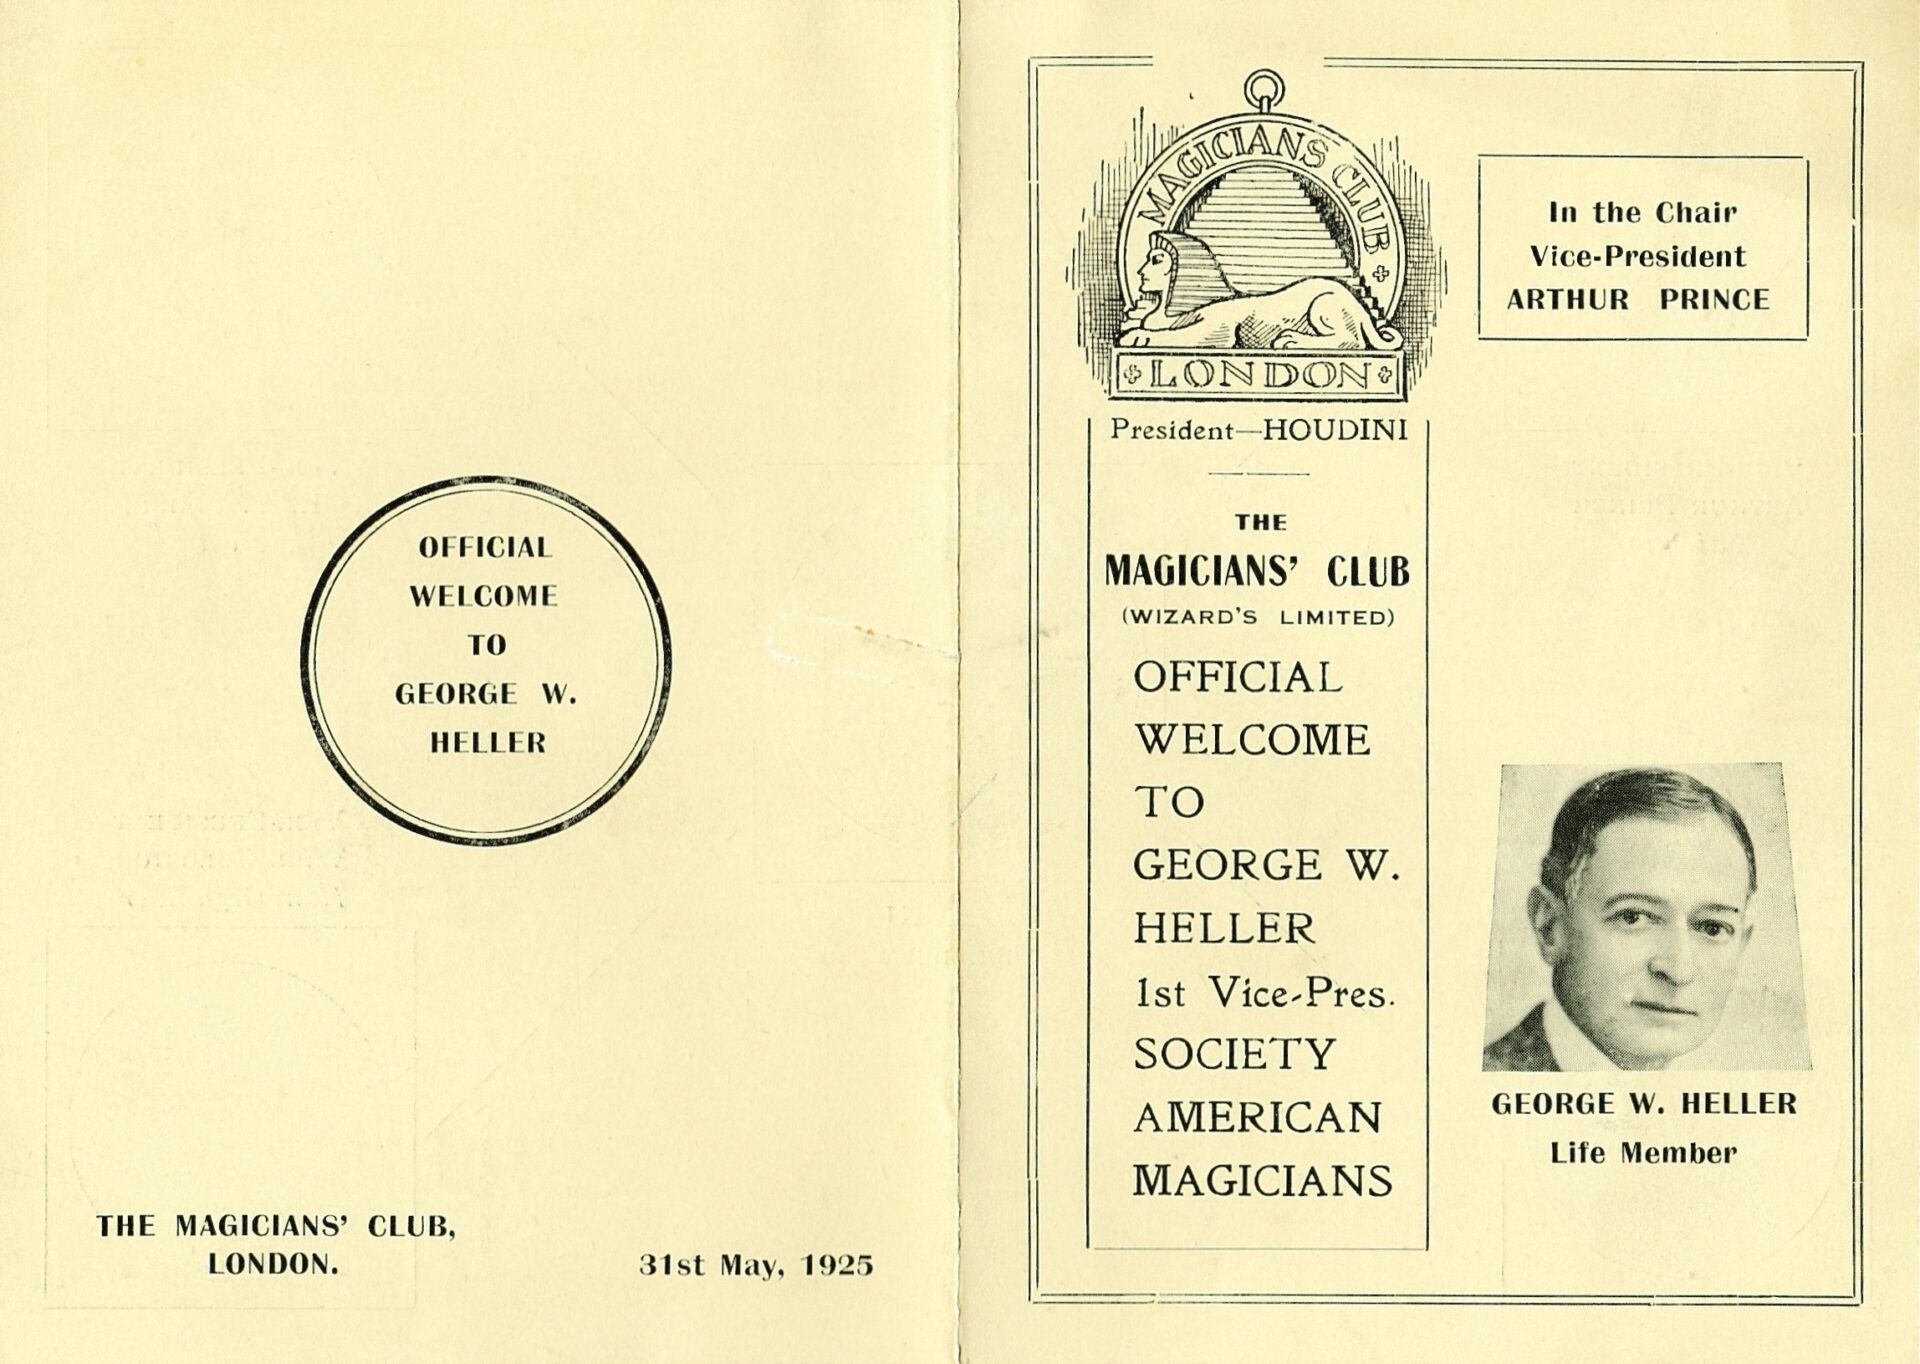 The Magicians’ Club Official Welcome to George W. Heller. 31 May 1925